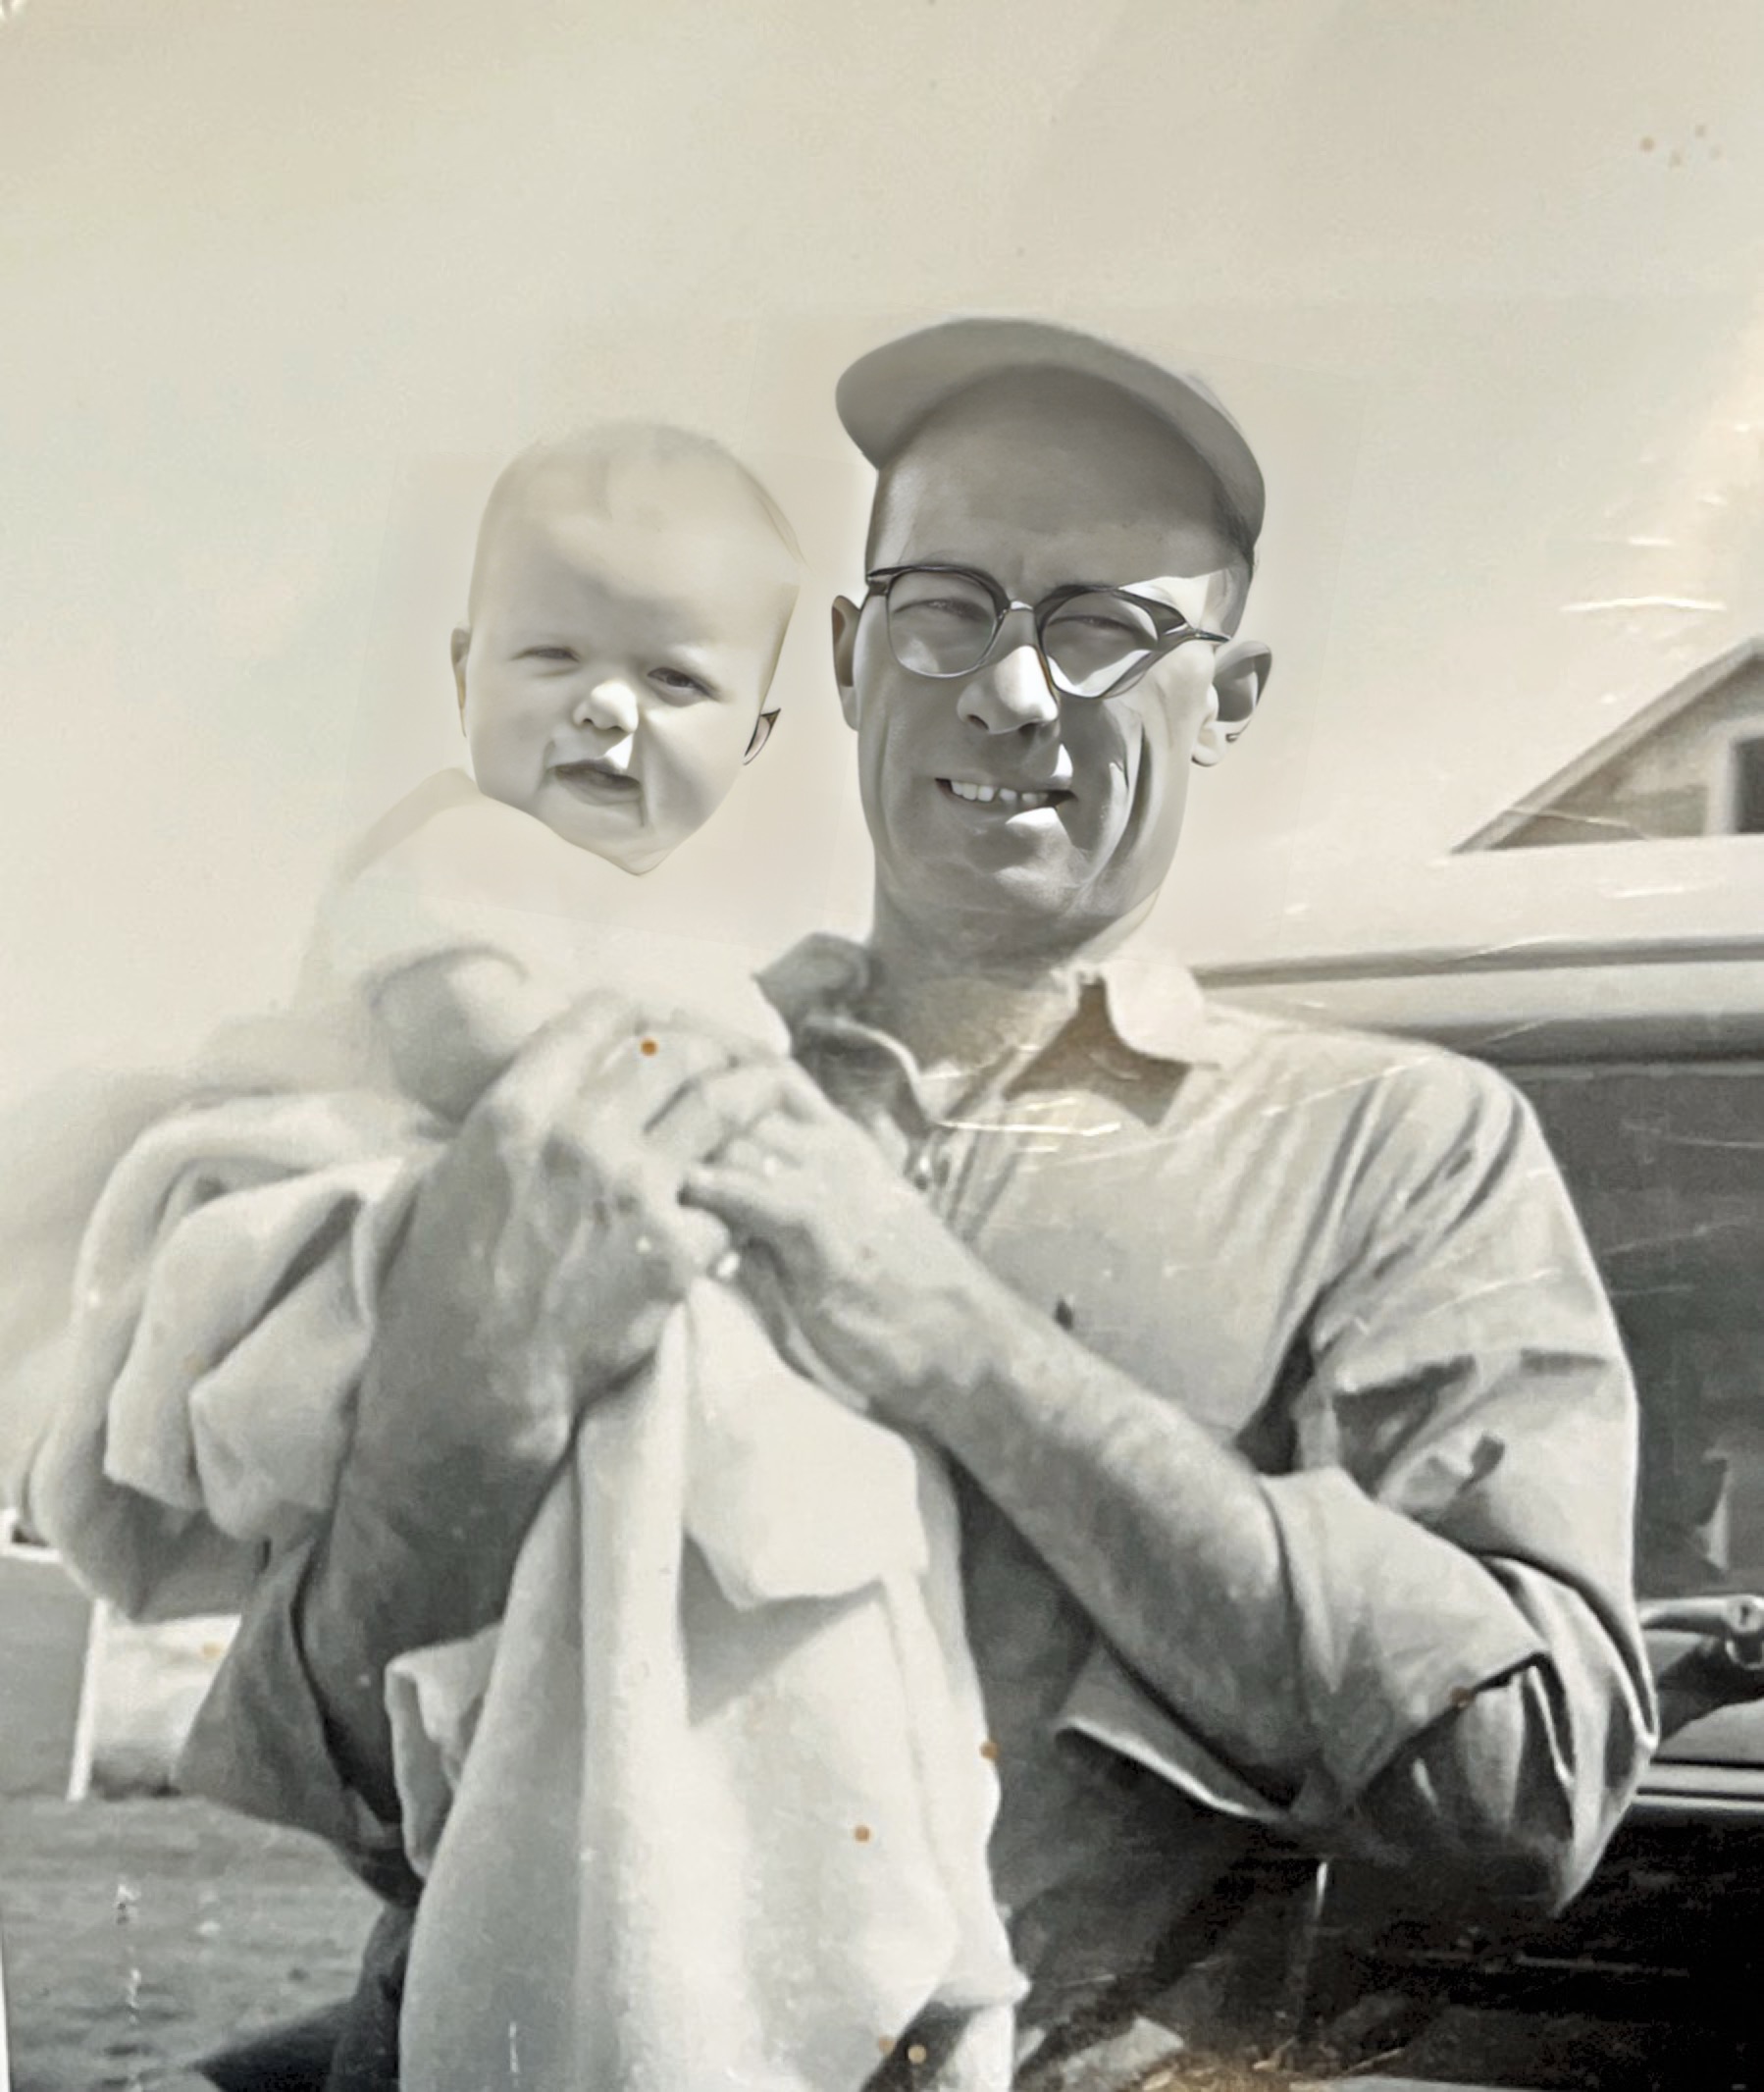 Me and my dad 1955. Love you Dad
Fort Buford, North Dakota